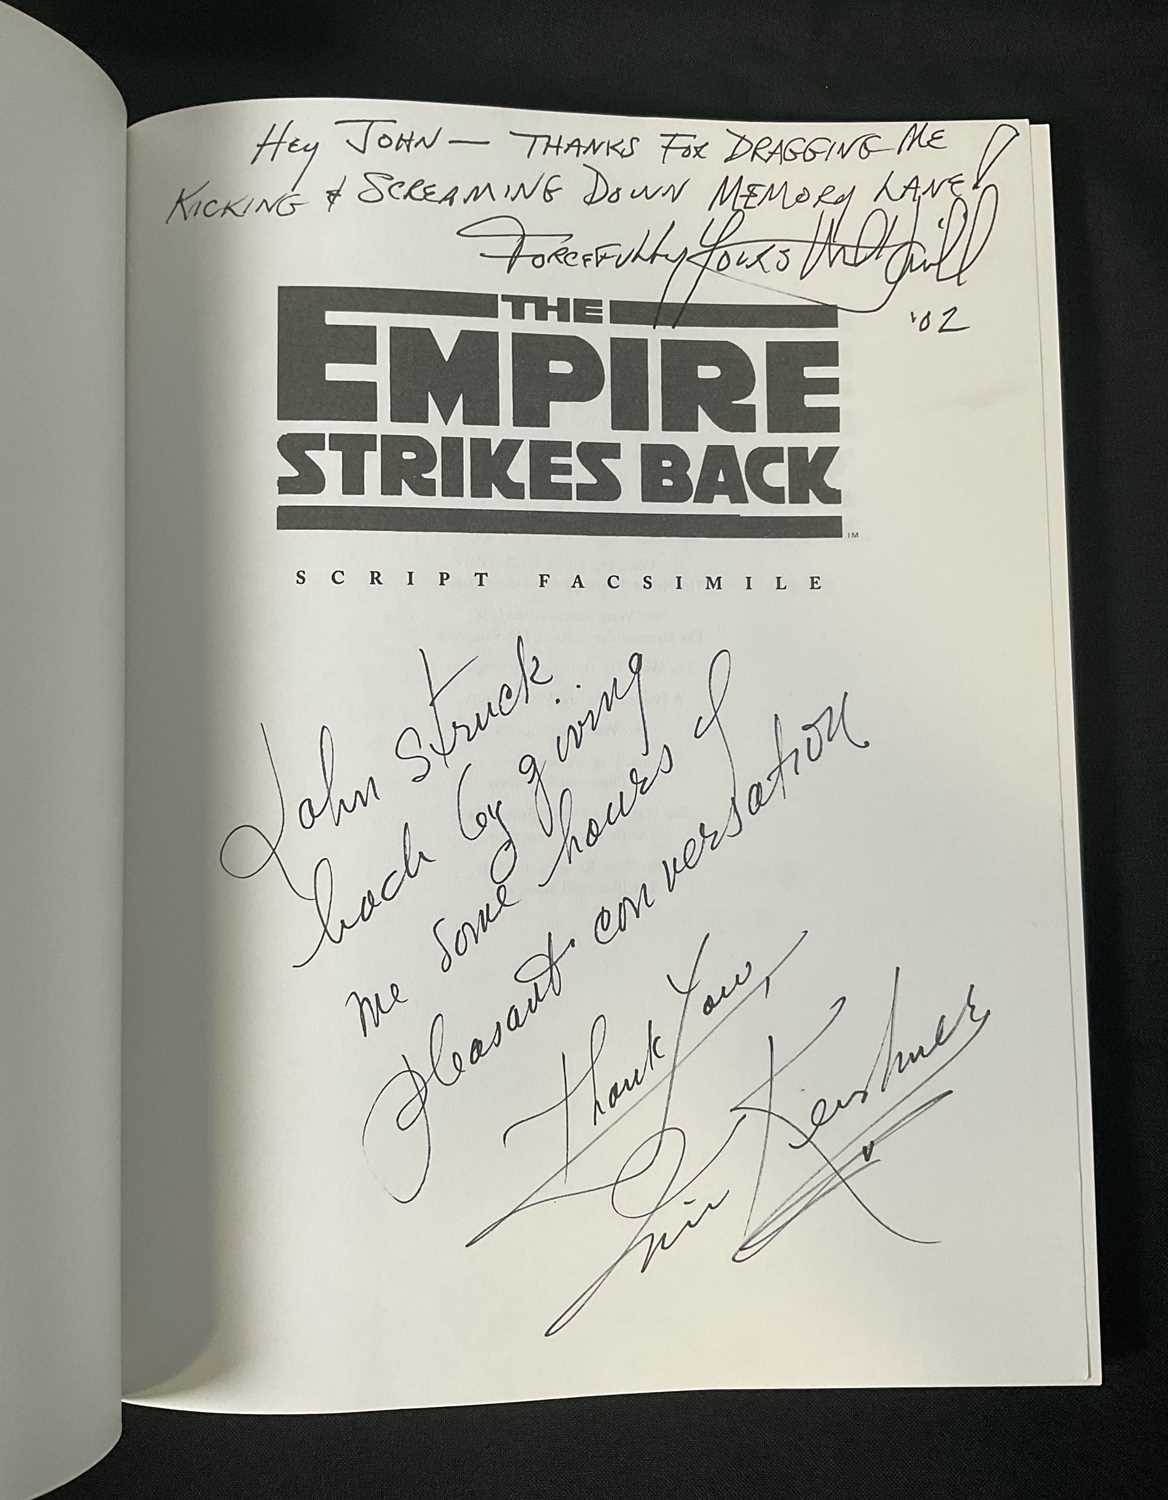 STAR WARS EPISODE V - THE EMPIRE STRIKES BACK 1st edition facsimile script (1998) signed by MARK